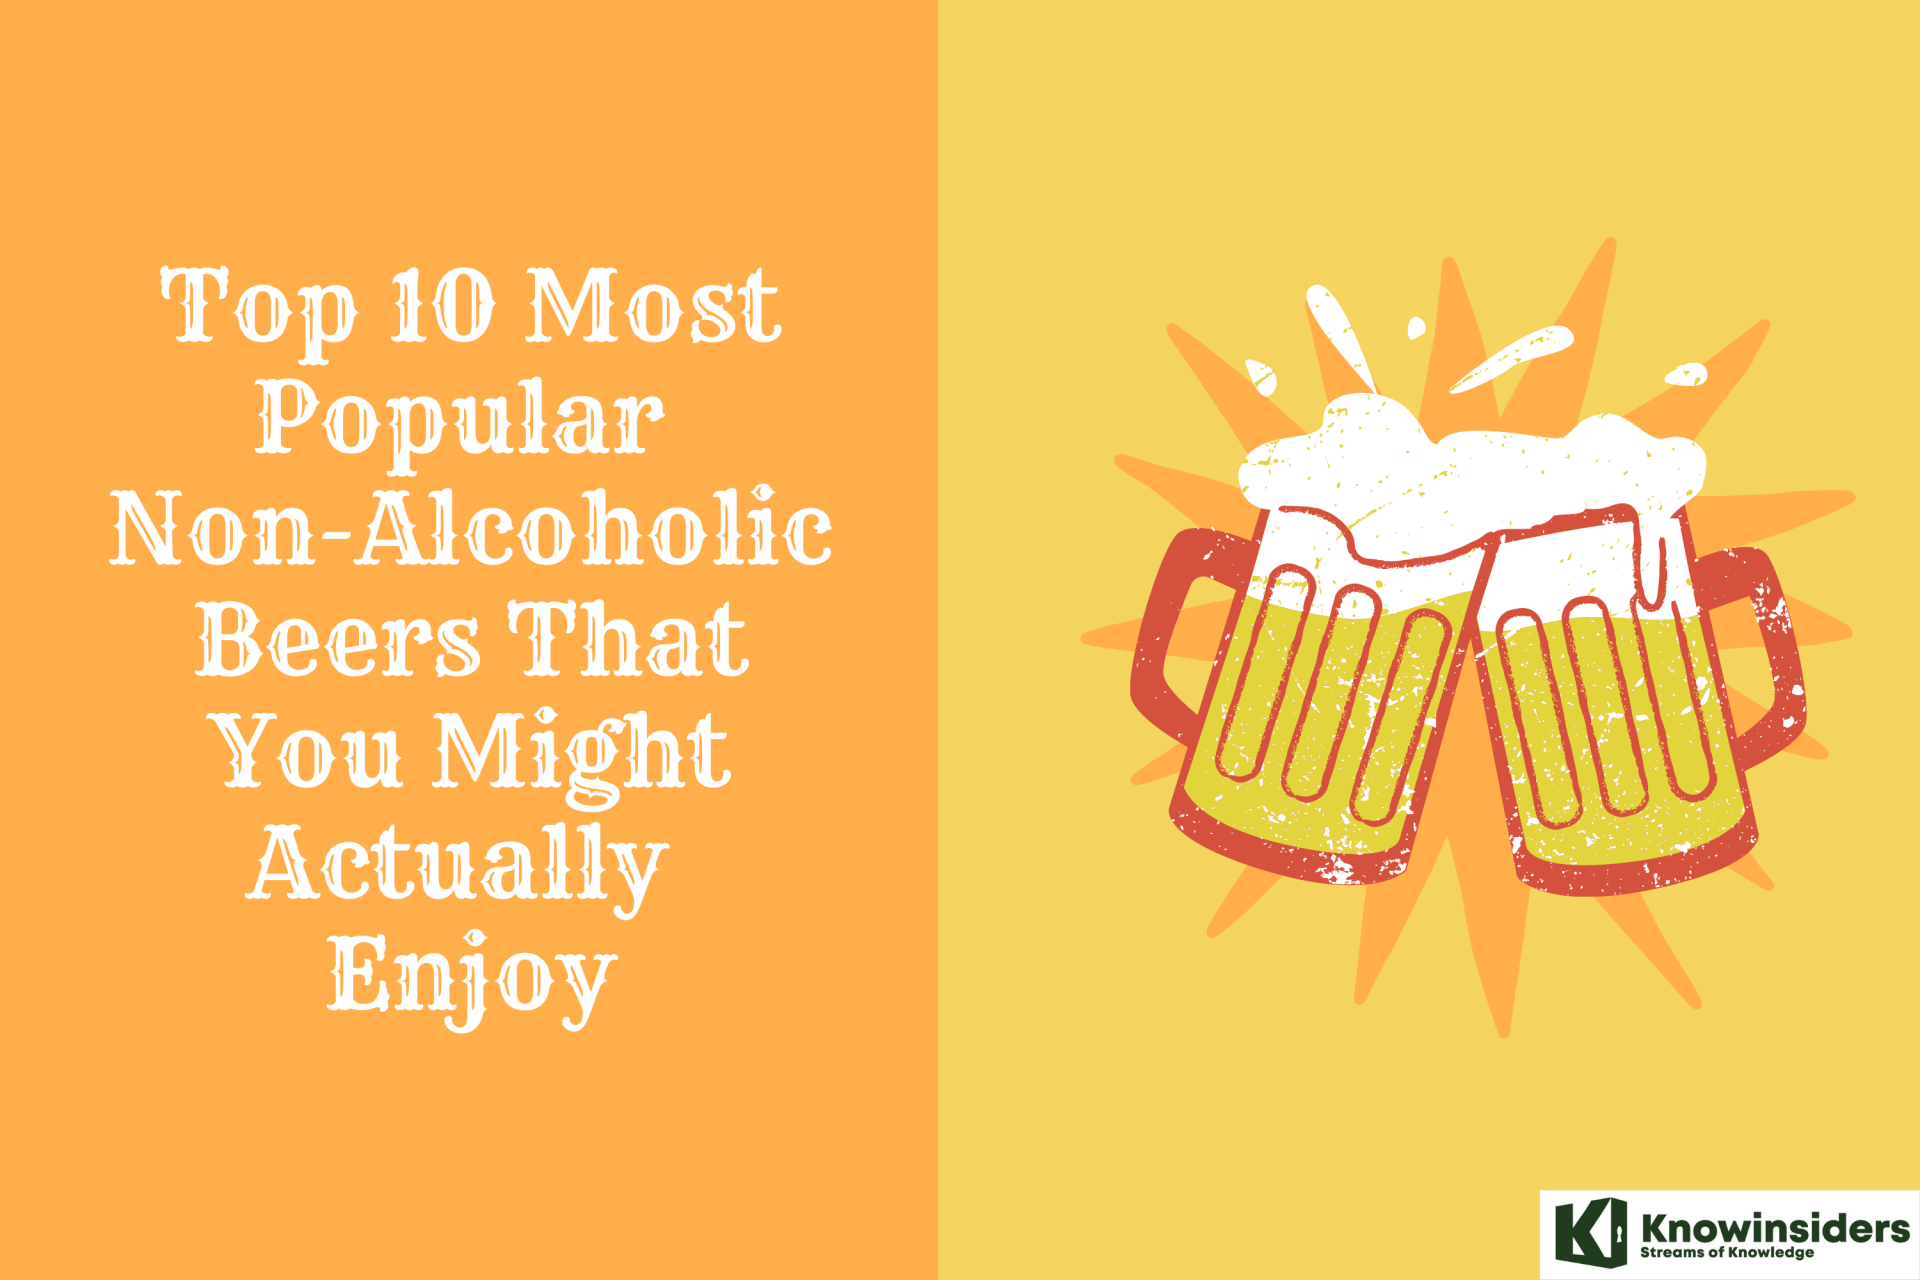 Top 10 Most Popular Non-Alcoholic Beers That You Might Actually Enjoy